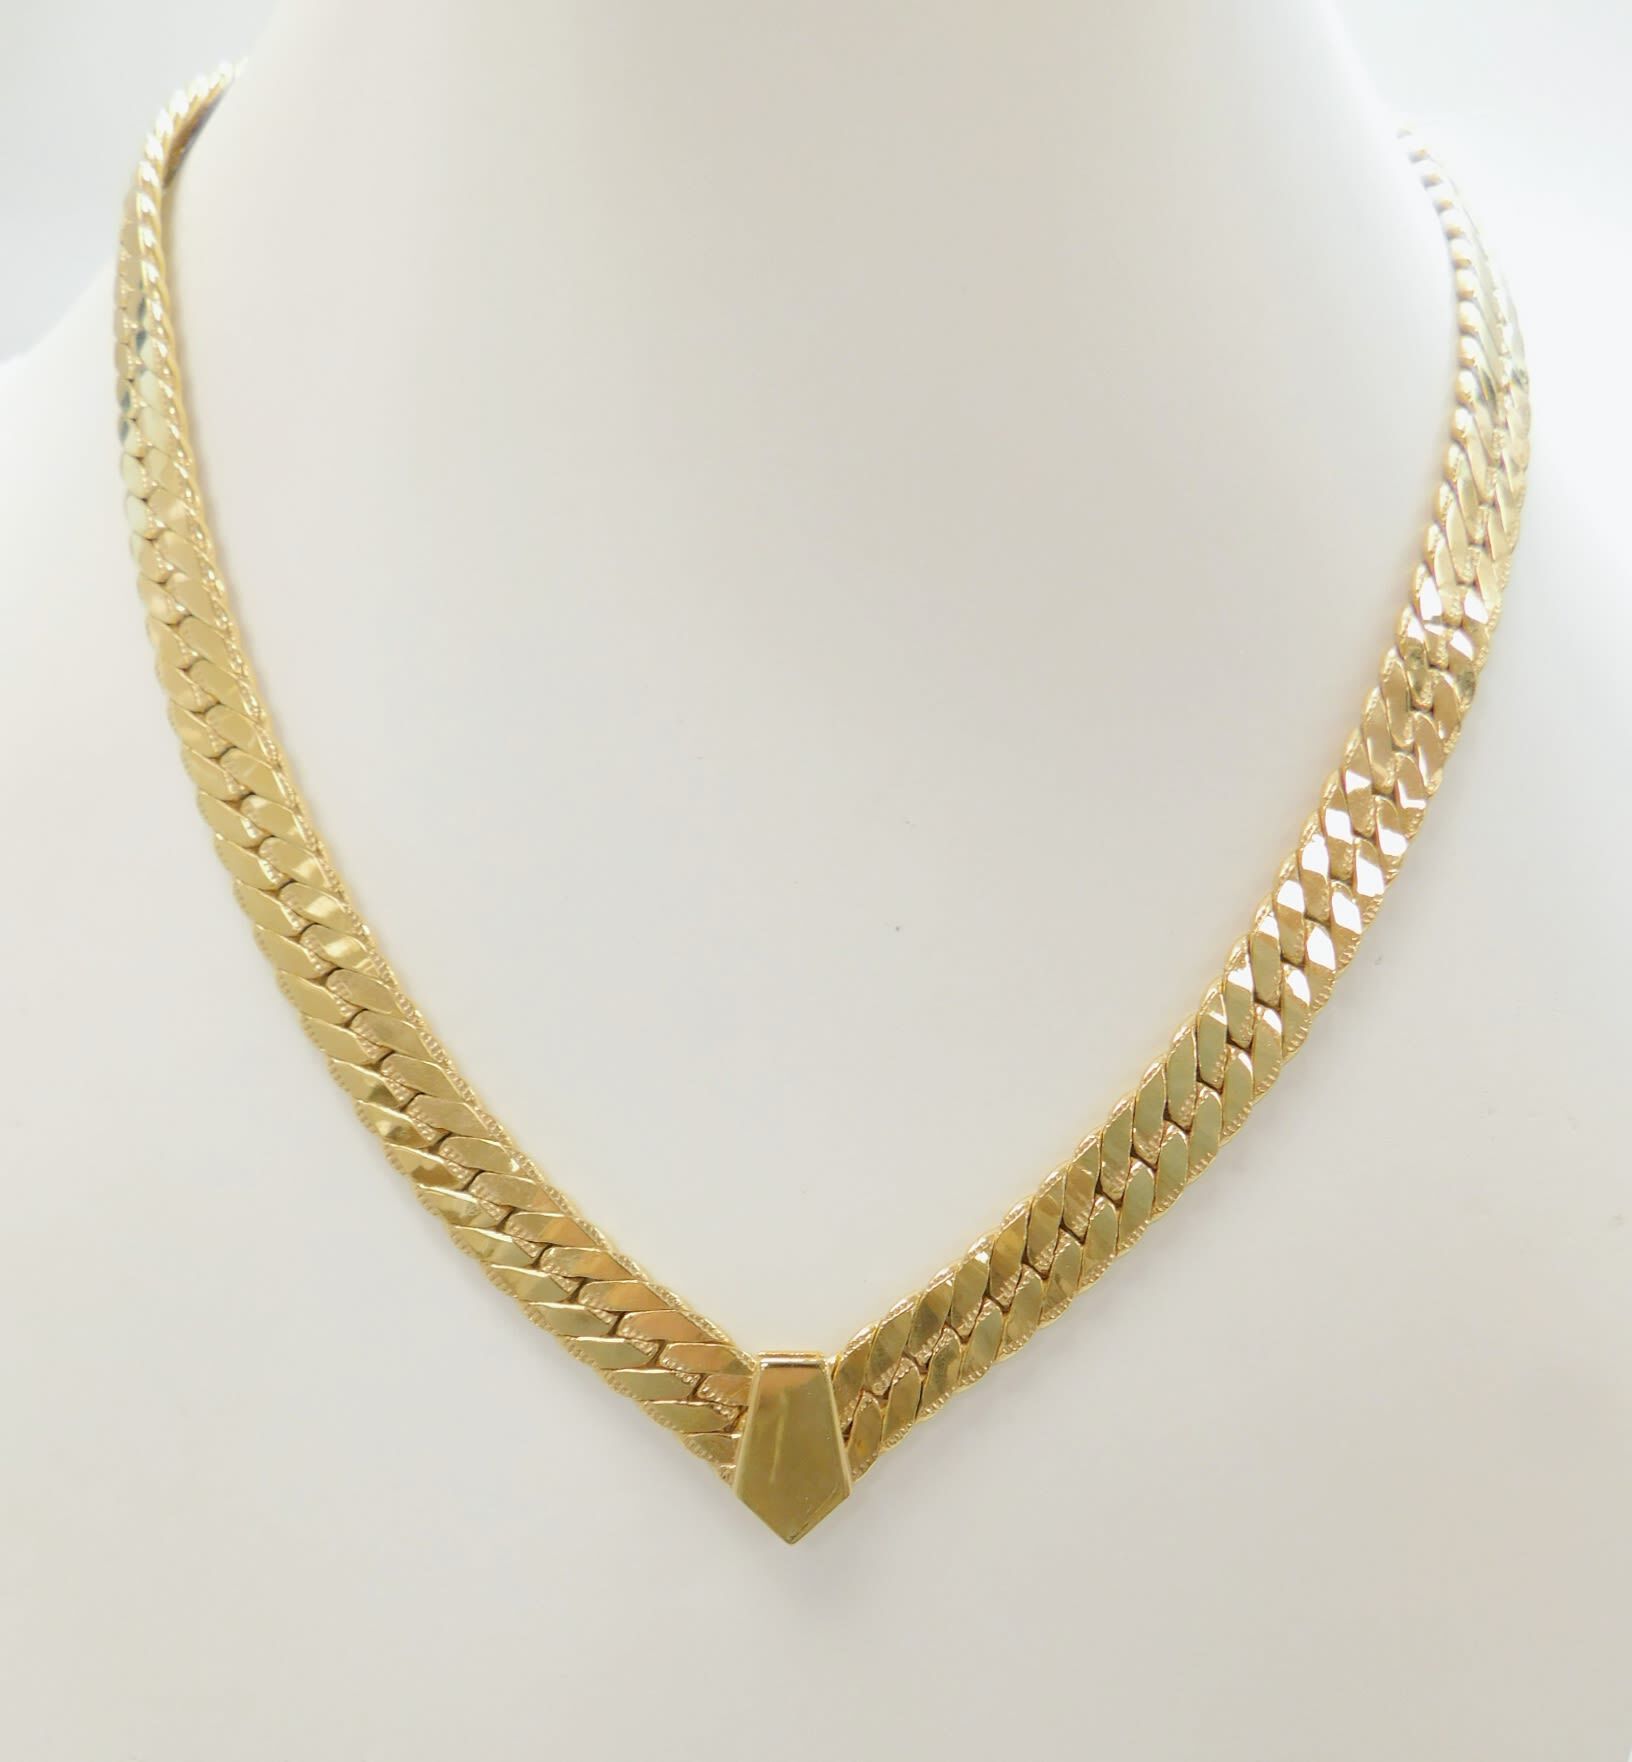 NAPIER vintage gold plated necklace | MaryClassyChic